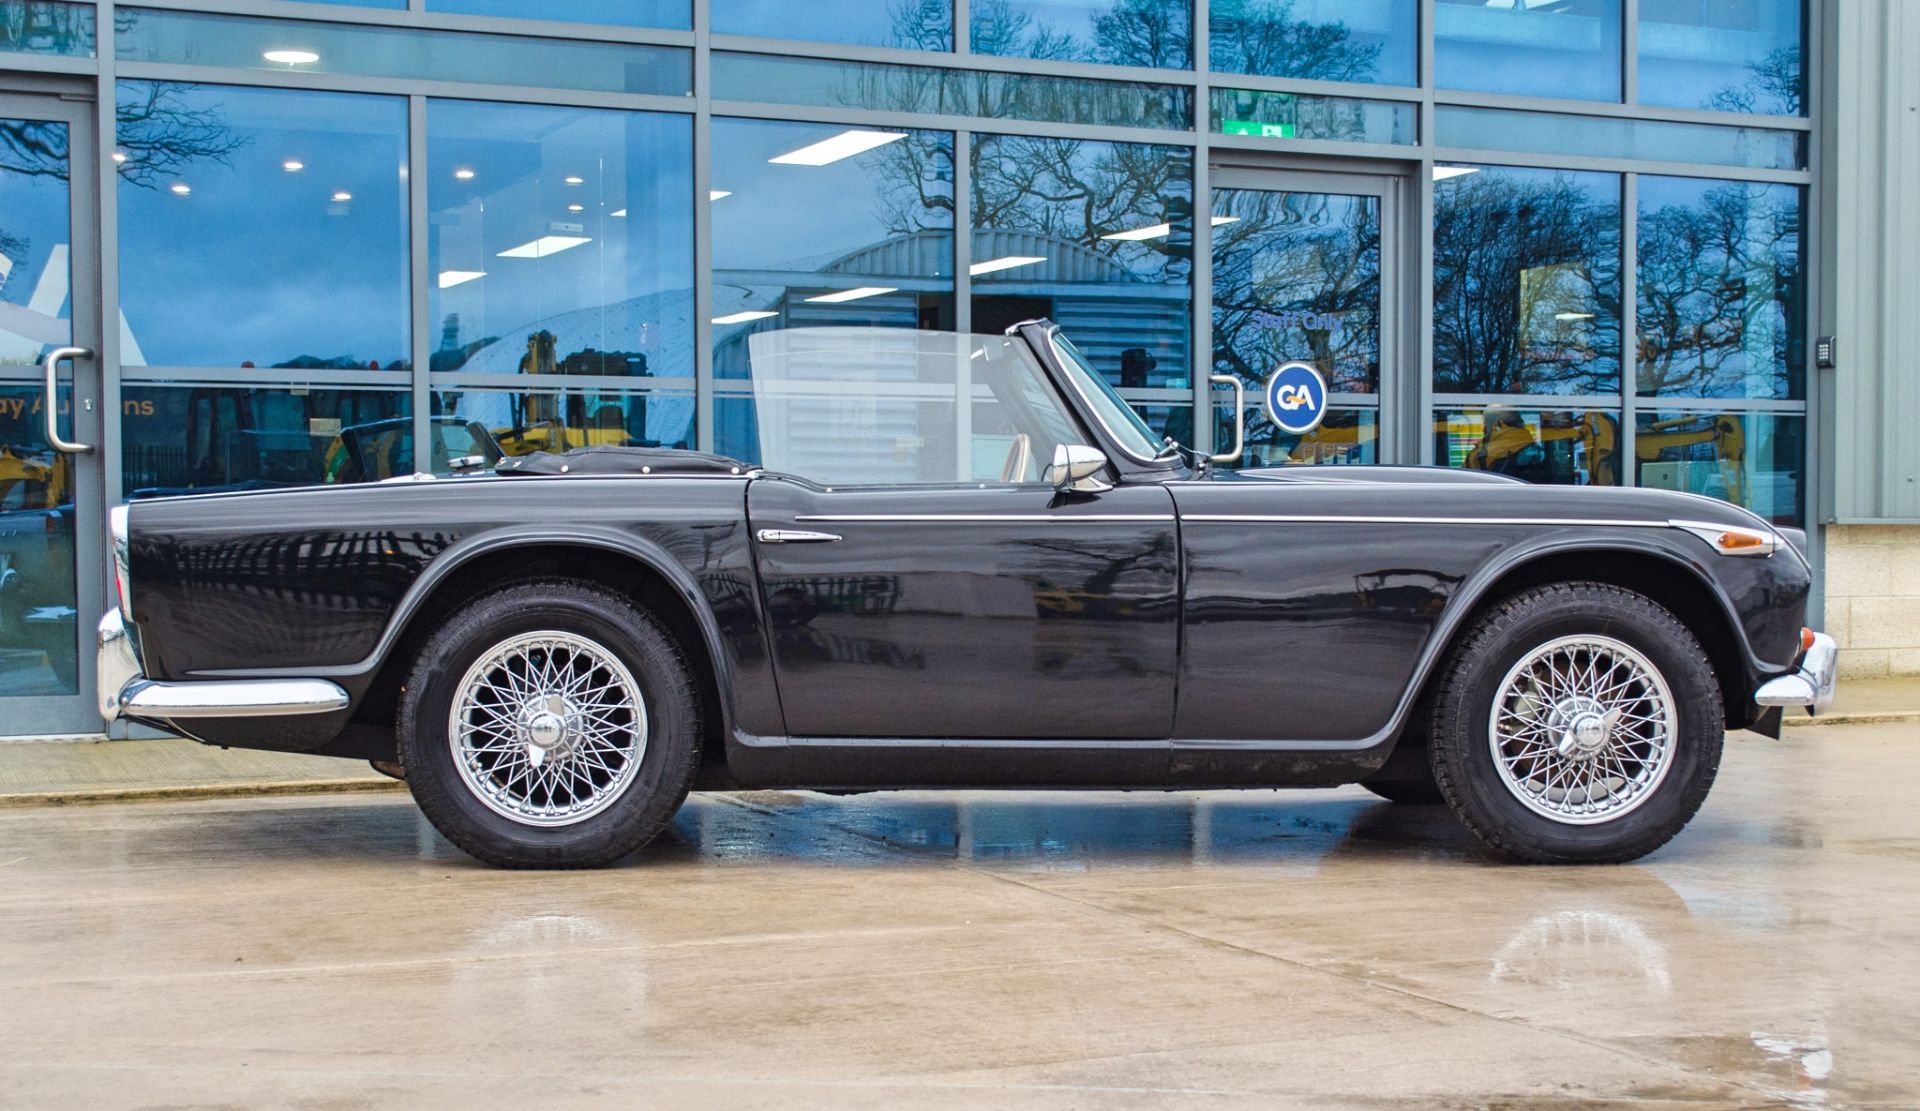 1967 Triumph TR4A IRS 2135cc convertible - Image 13 of 56